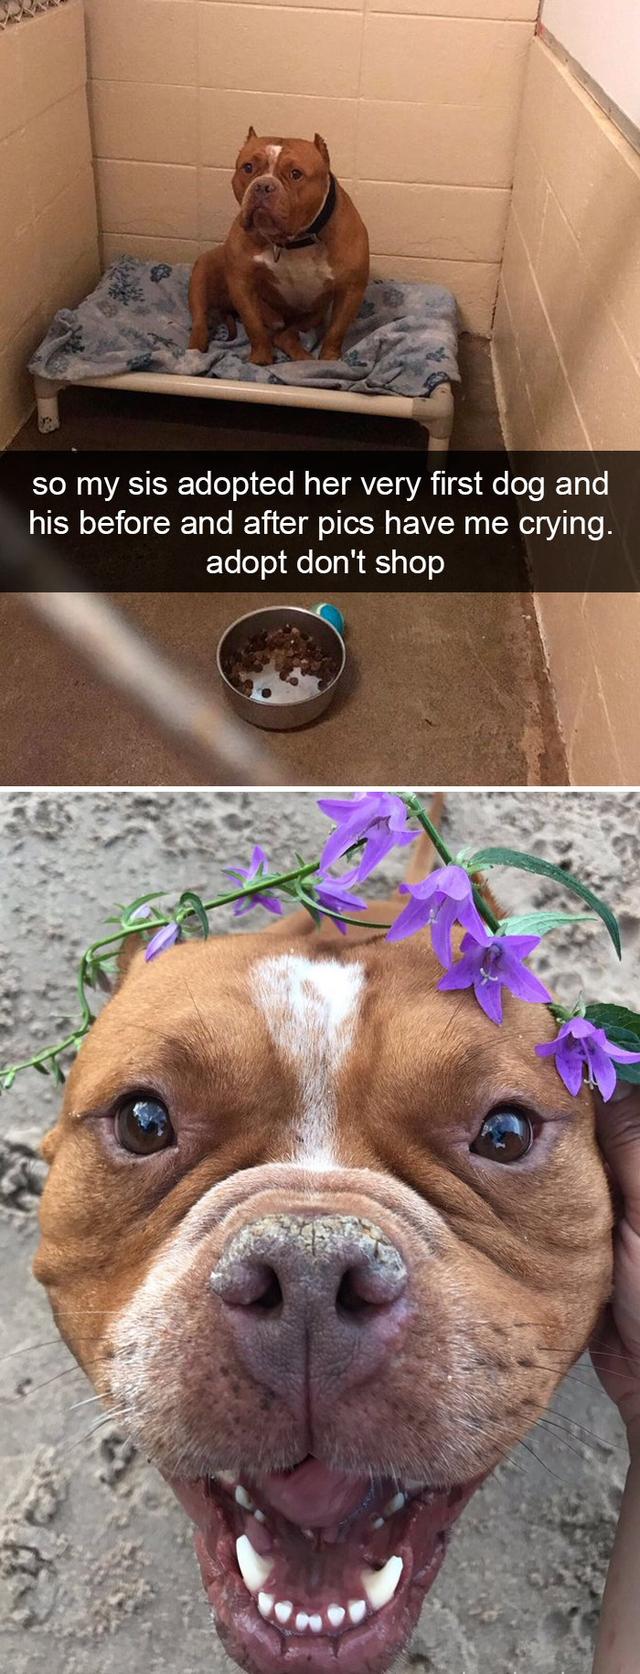 funny dog memes - so my sis adopted her very first dog and his before and after pics have me crying. adopt don't shop